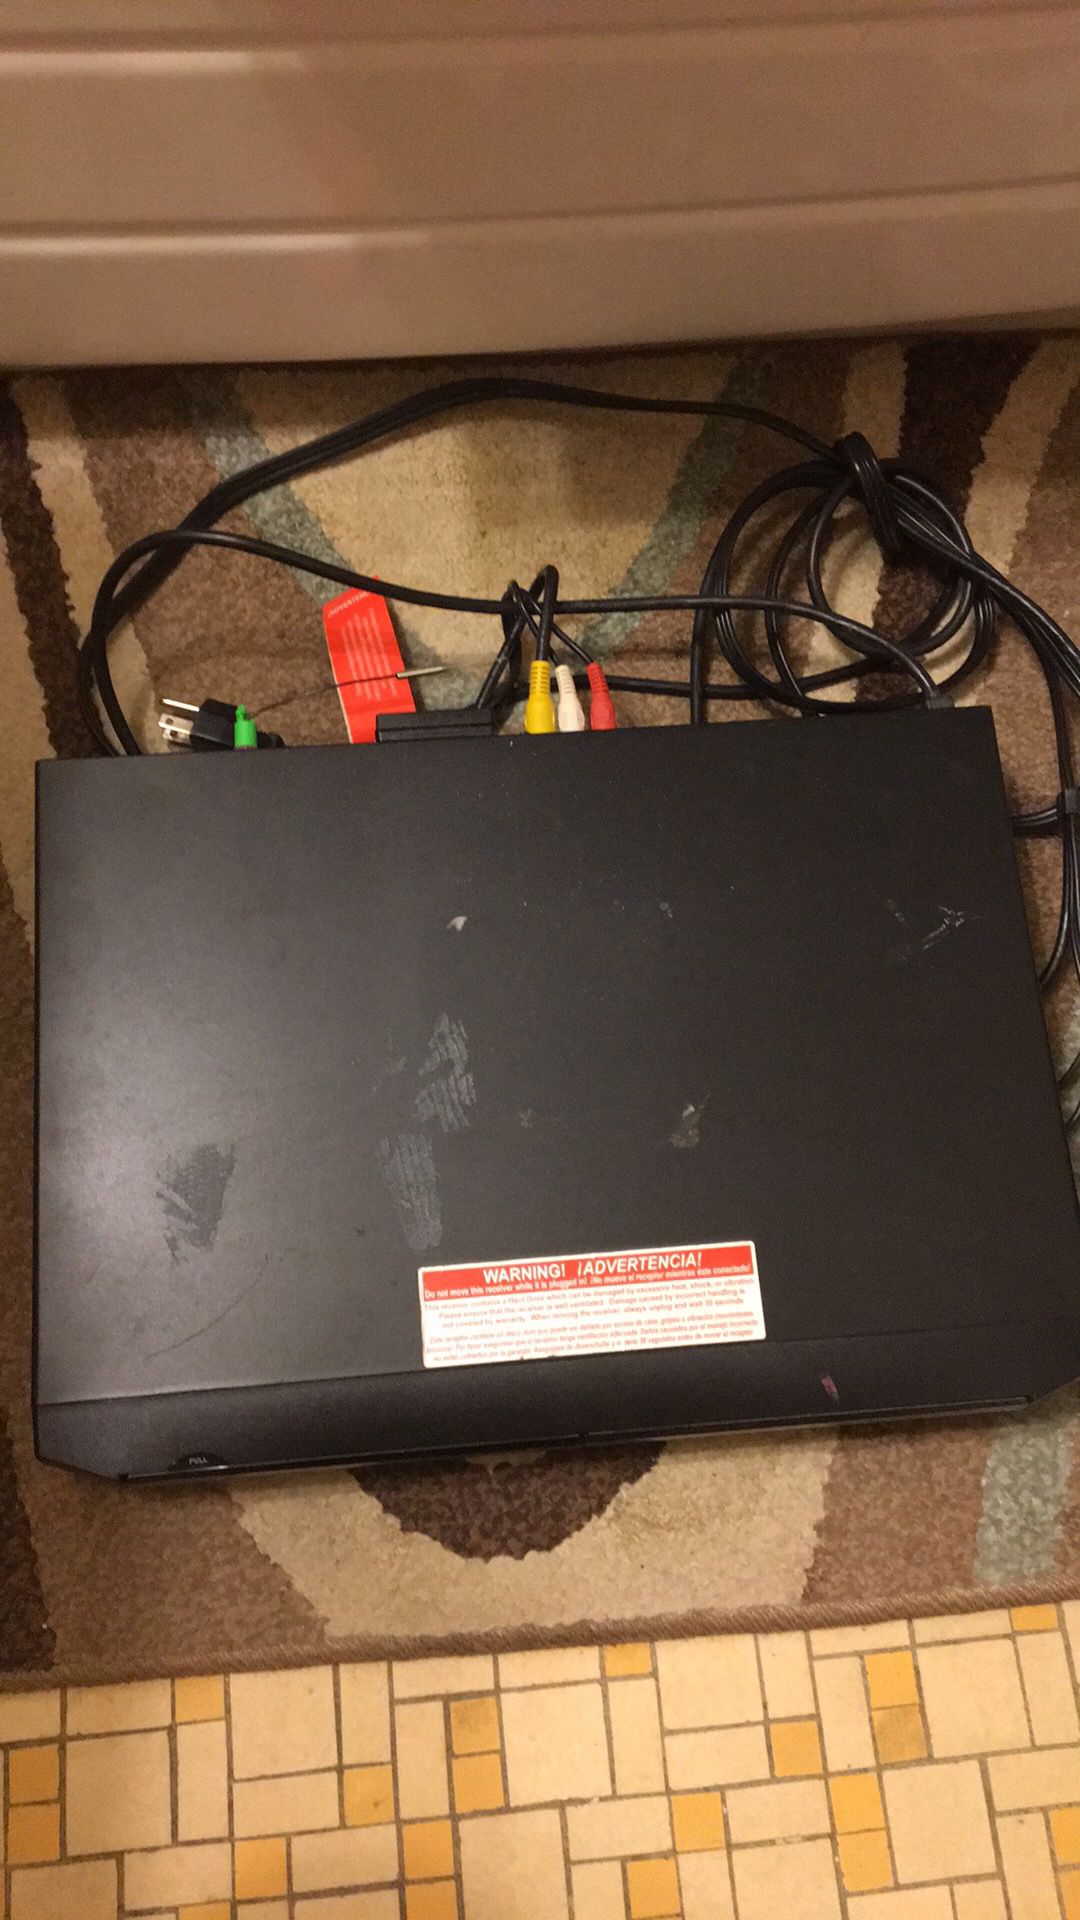 Dish network receiver